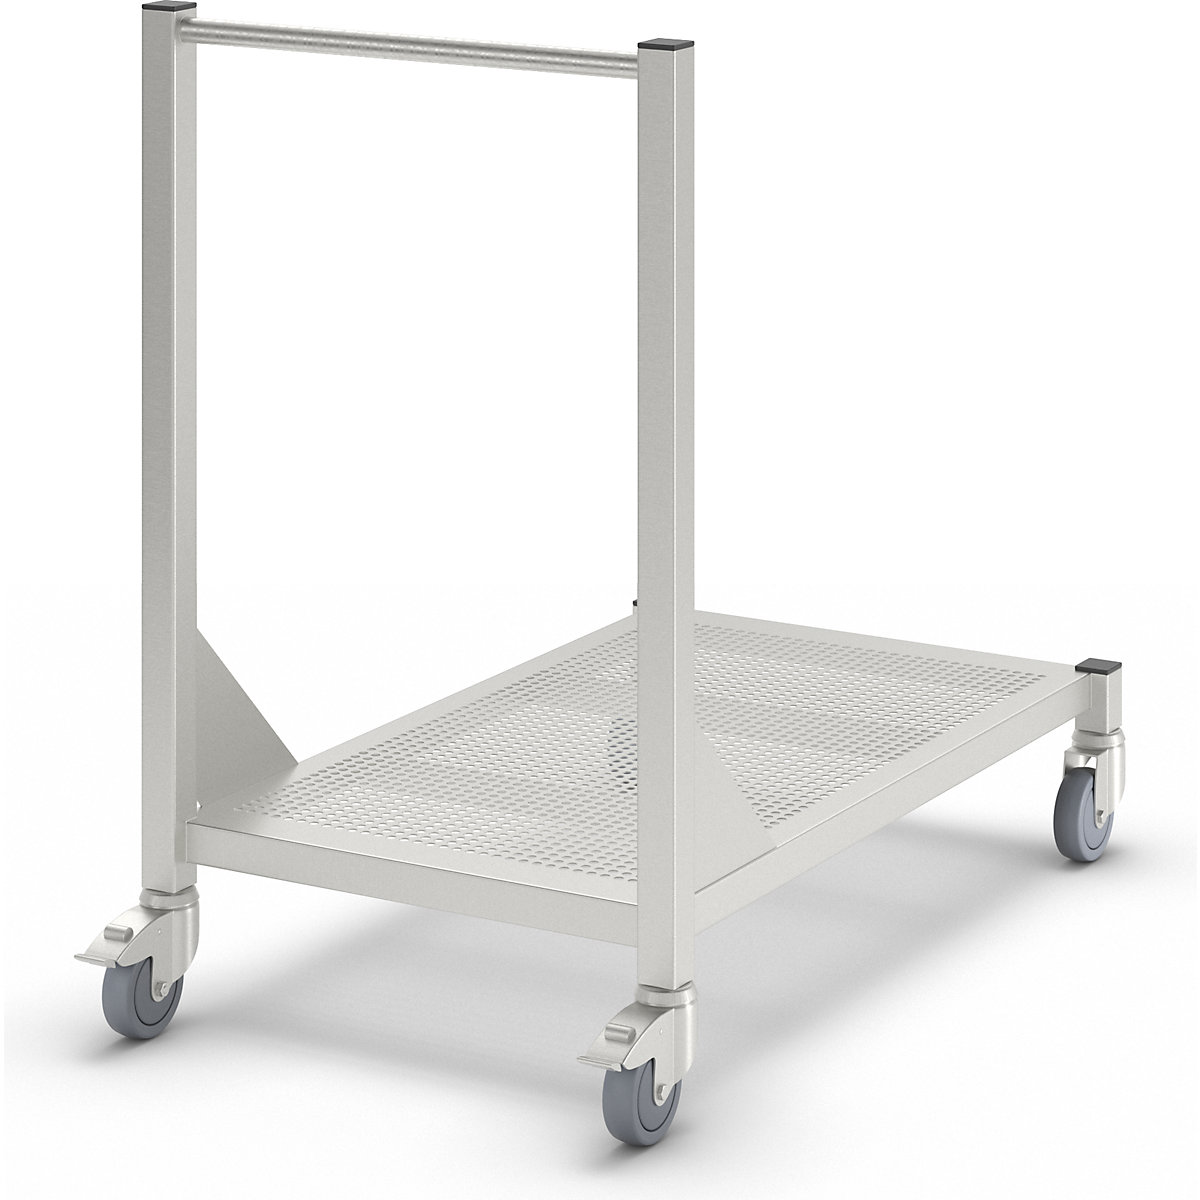 Mobile cleanroom table, made of stainless steel, 1 level, length 1000 mm-4